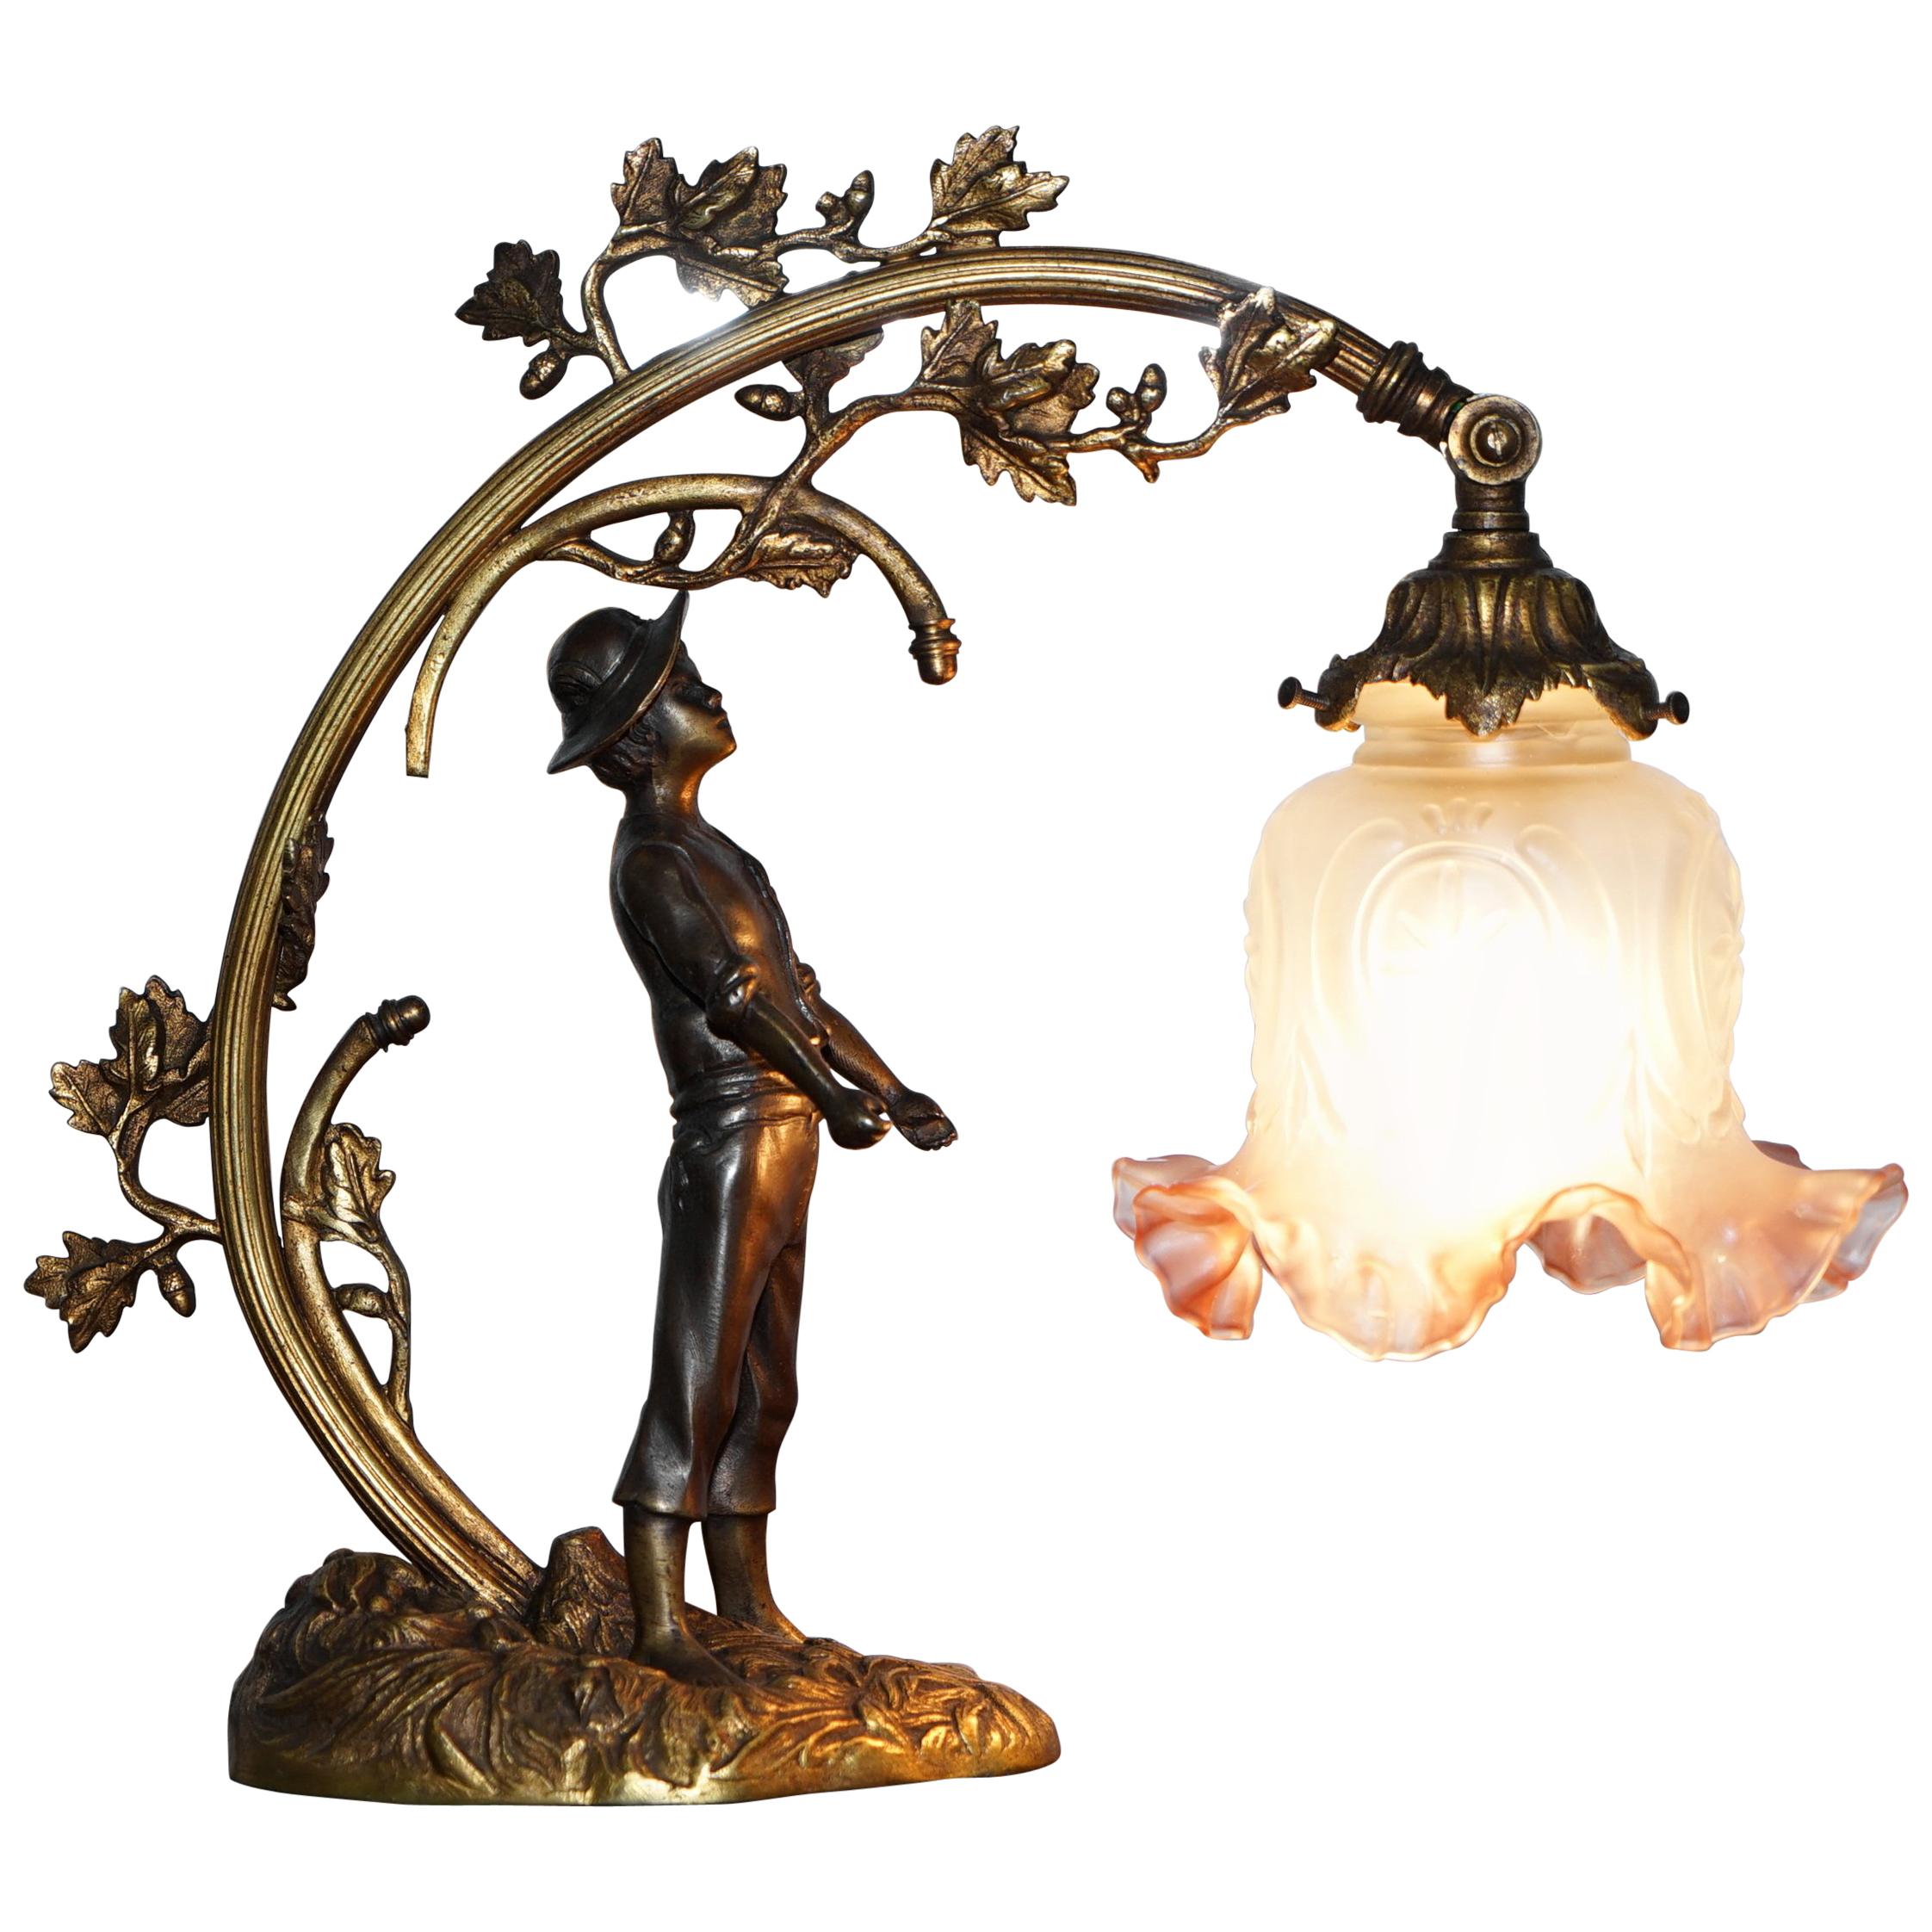 Stunning Solid Bronze circa 1920 Table Lamp with Statue Original Shade Rare Find